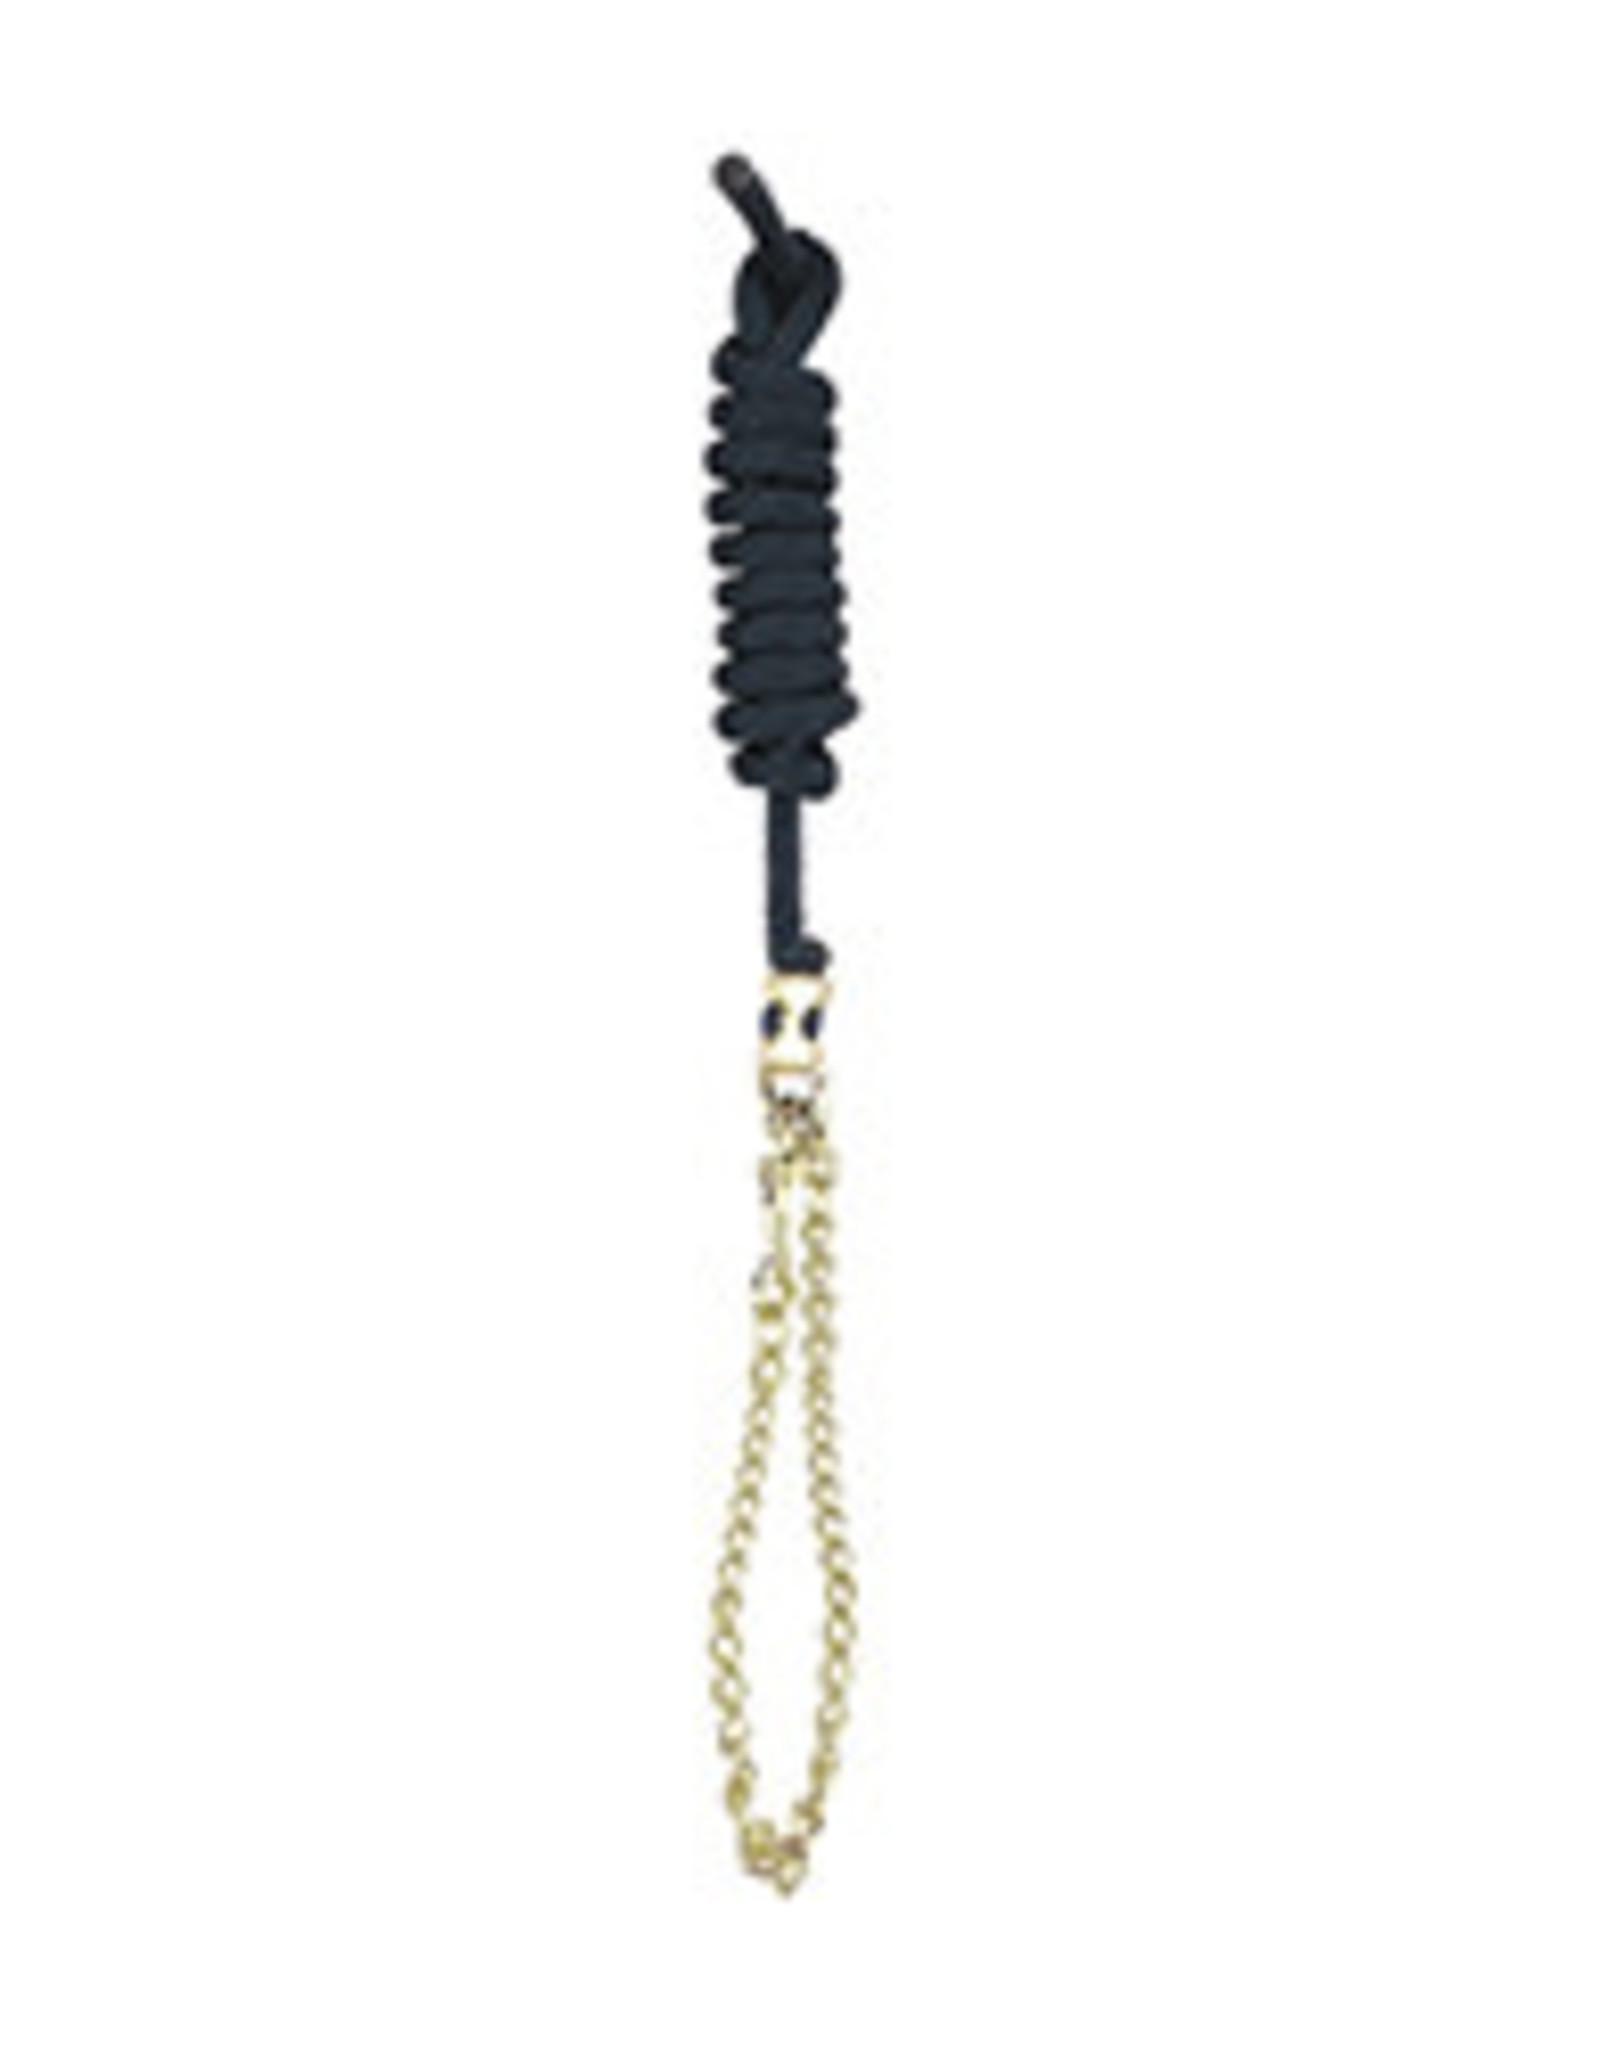 Poly Nylon Lead with Brass Plat